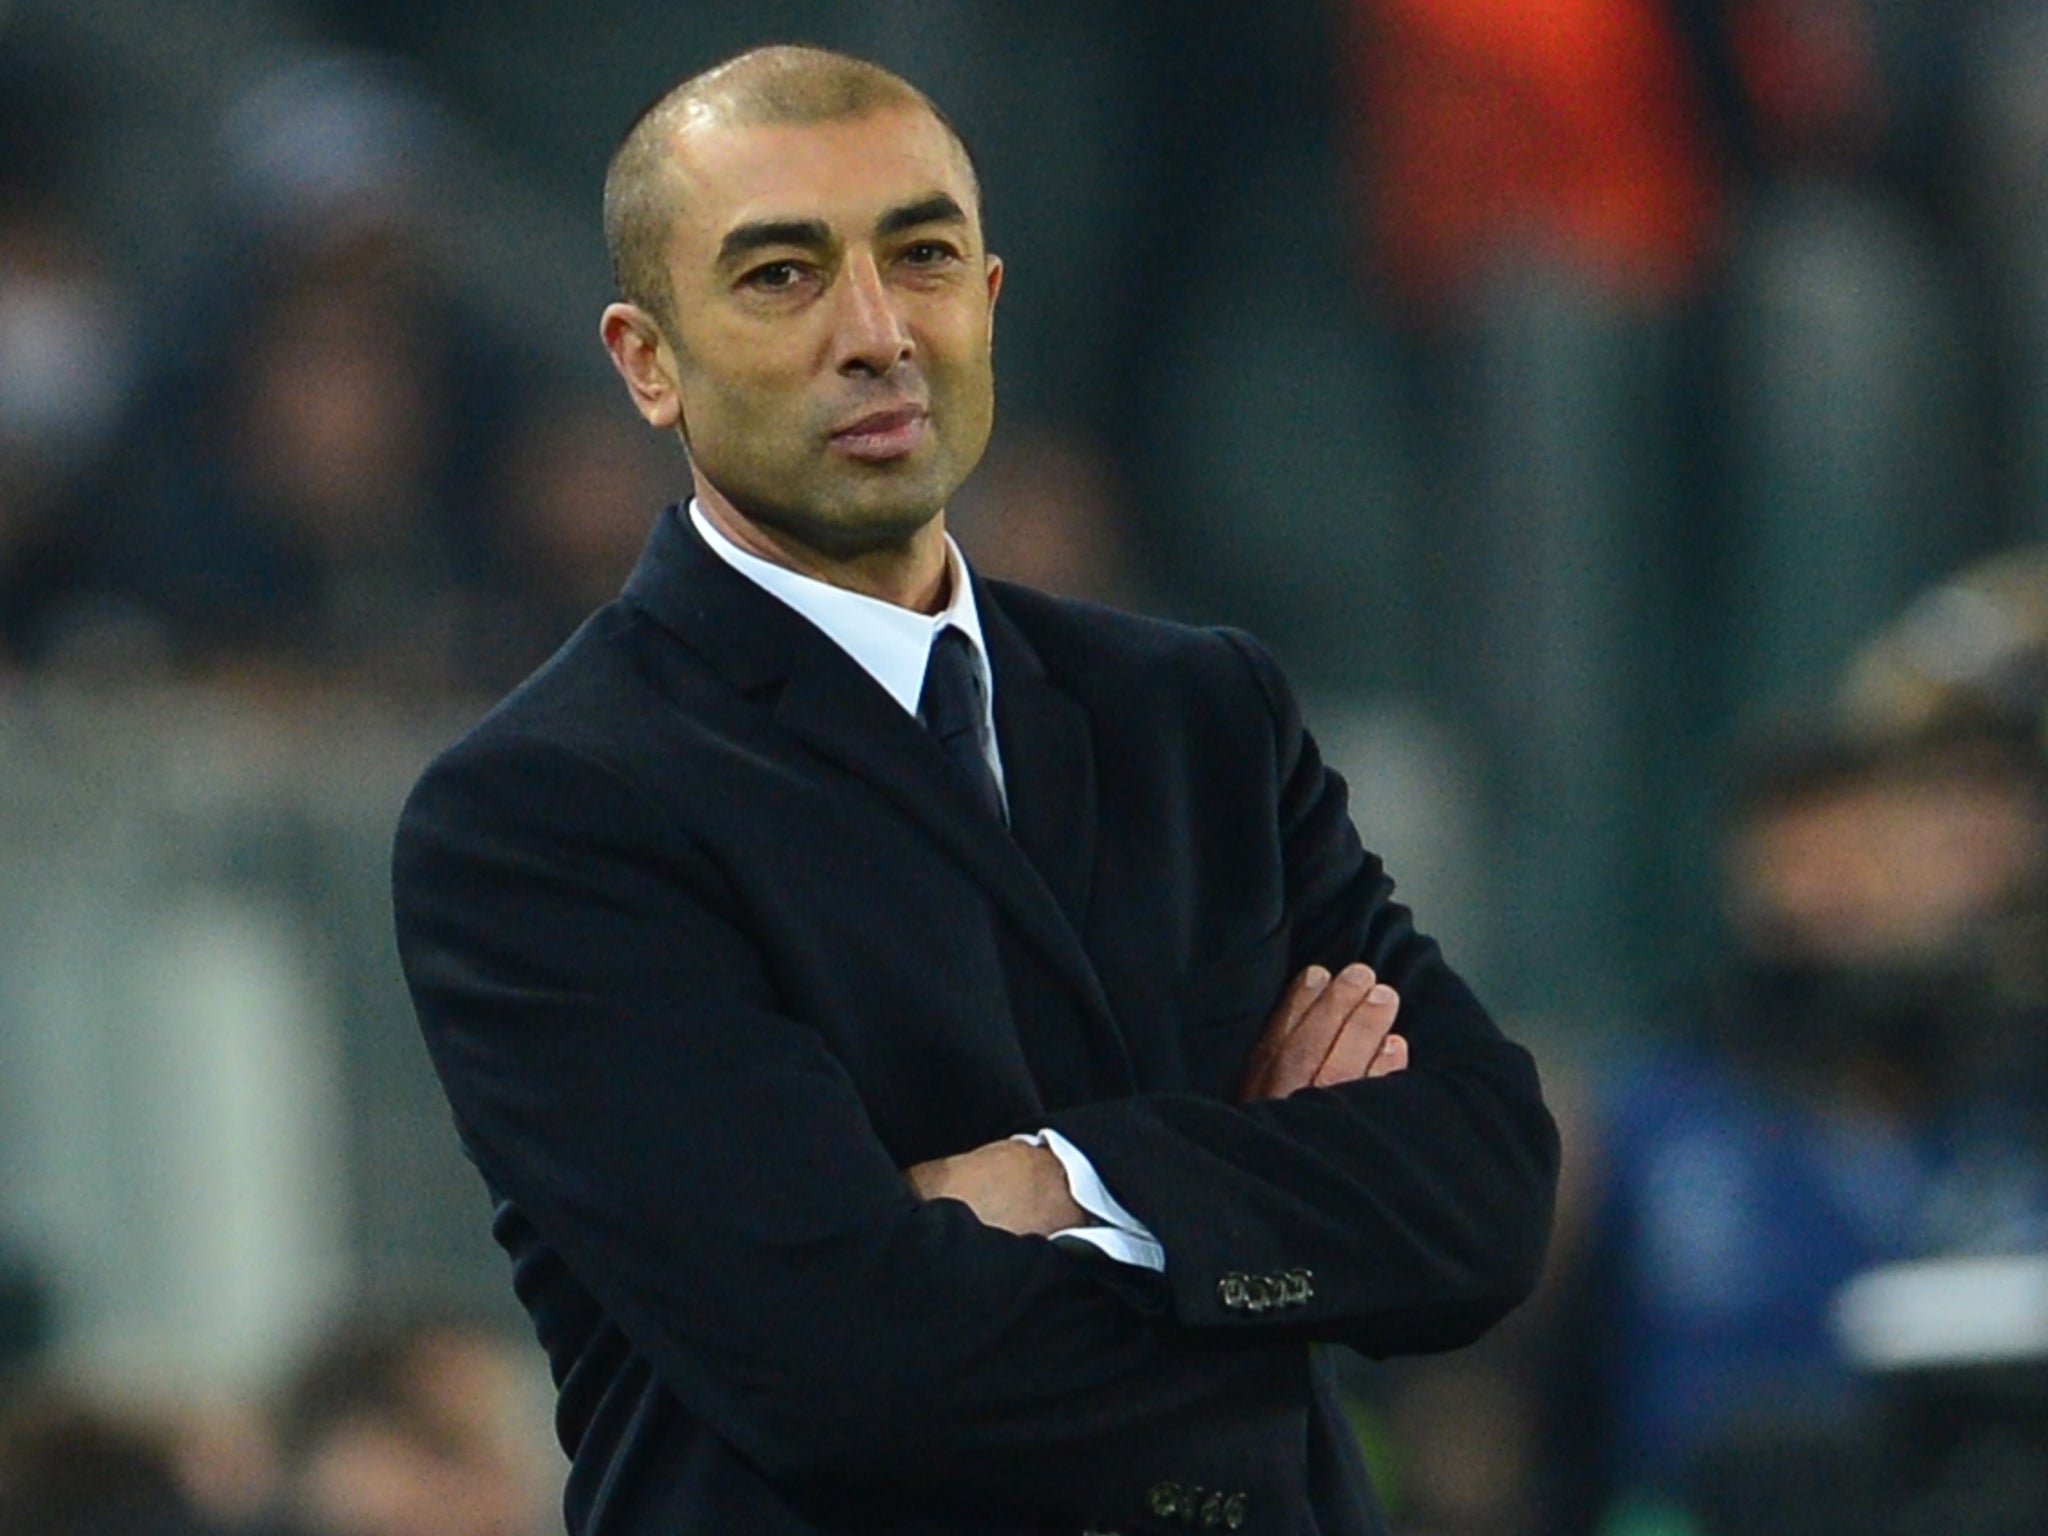 Di Matteo was sacked by the Blues yesterday